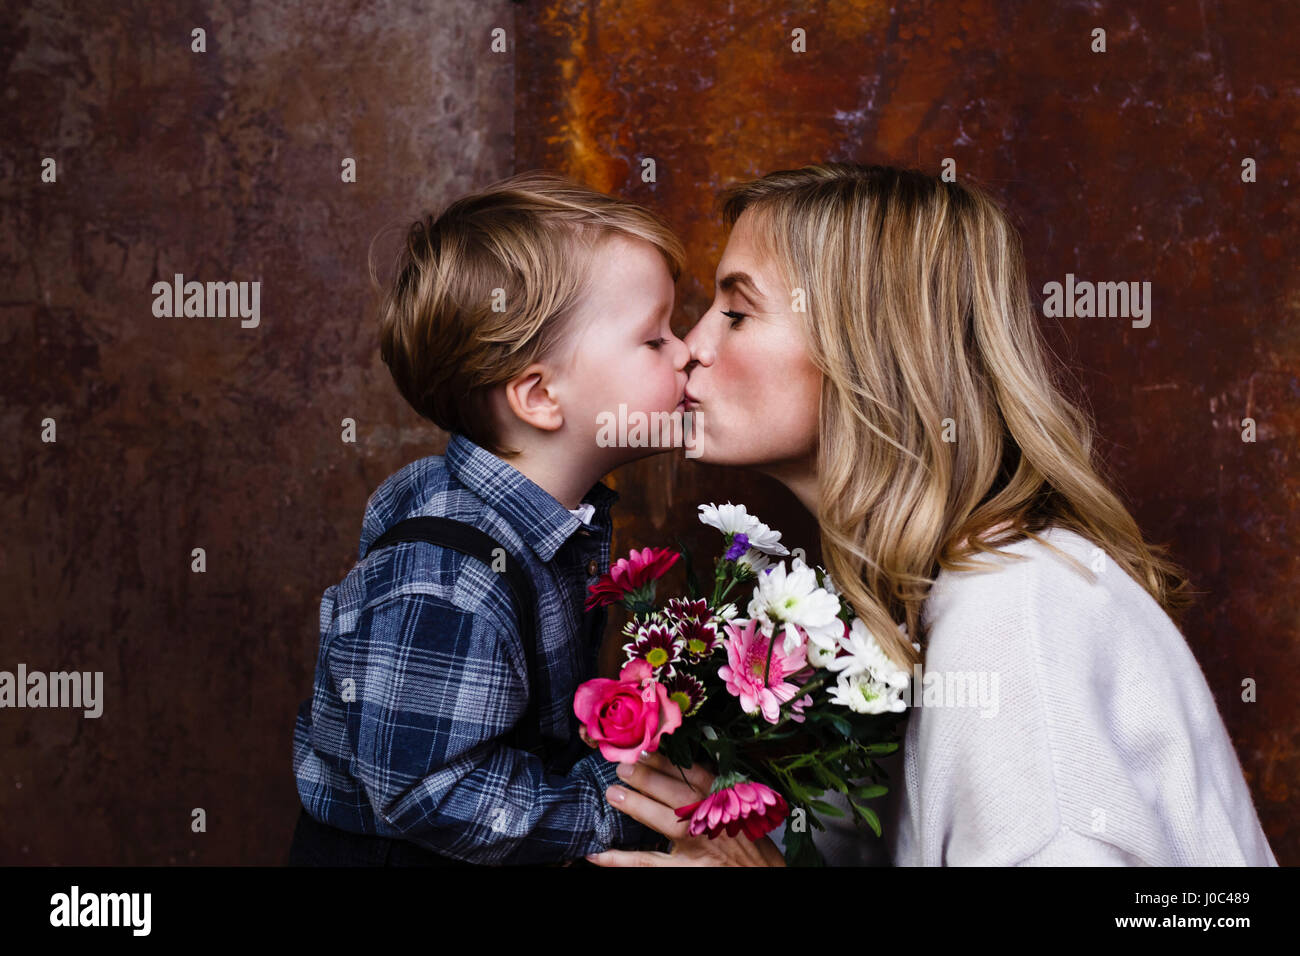 Young boy giving bunch of flowers to mother, mother kissing boy Stock Photo